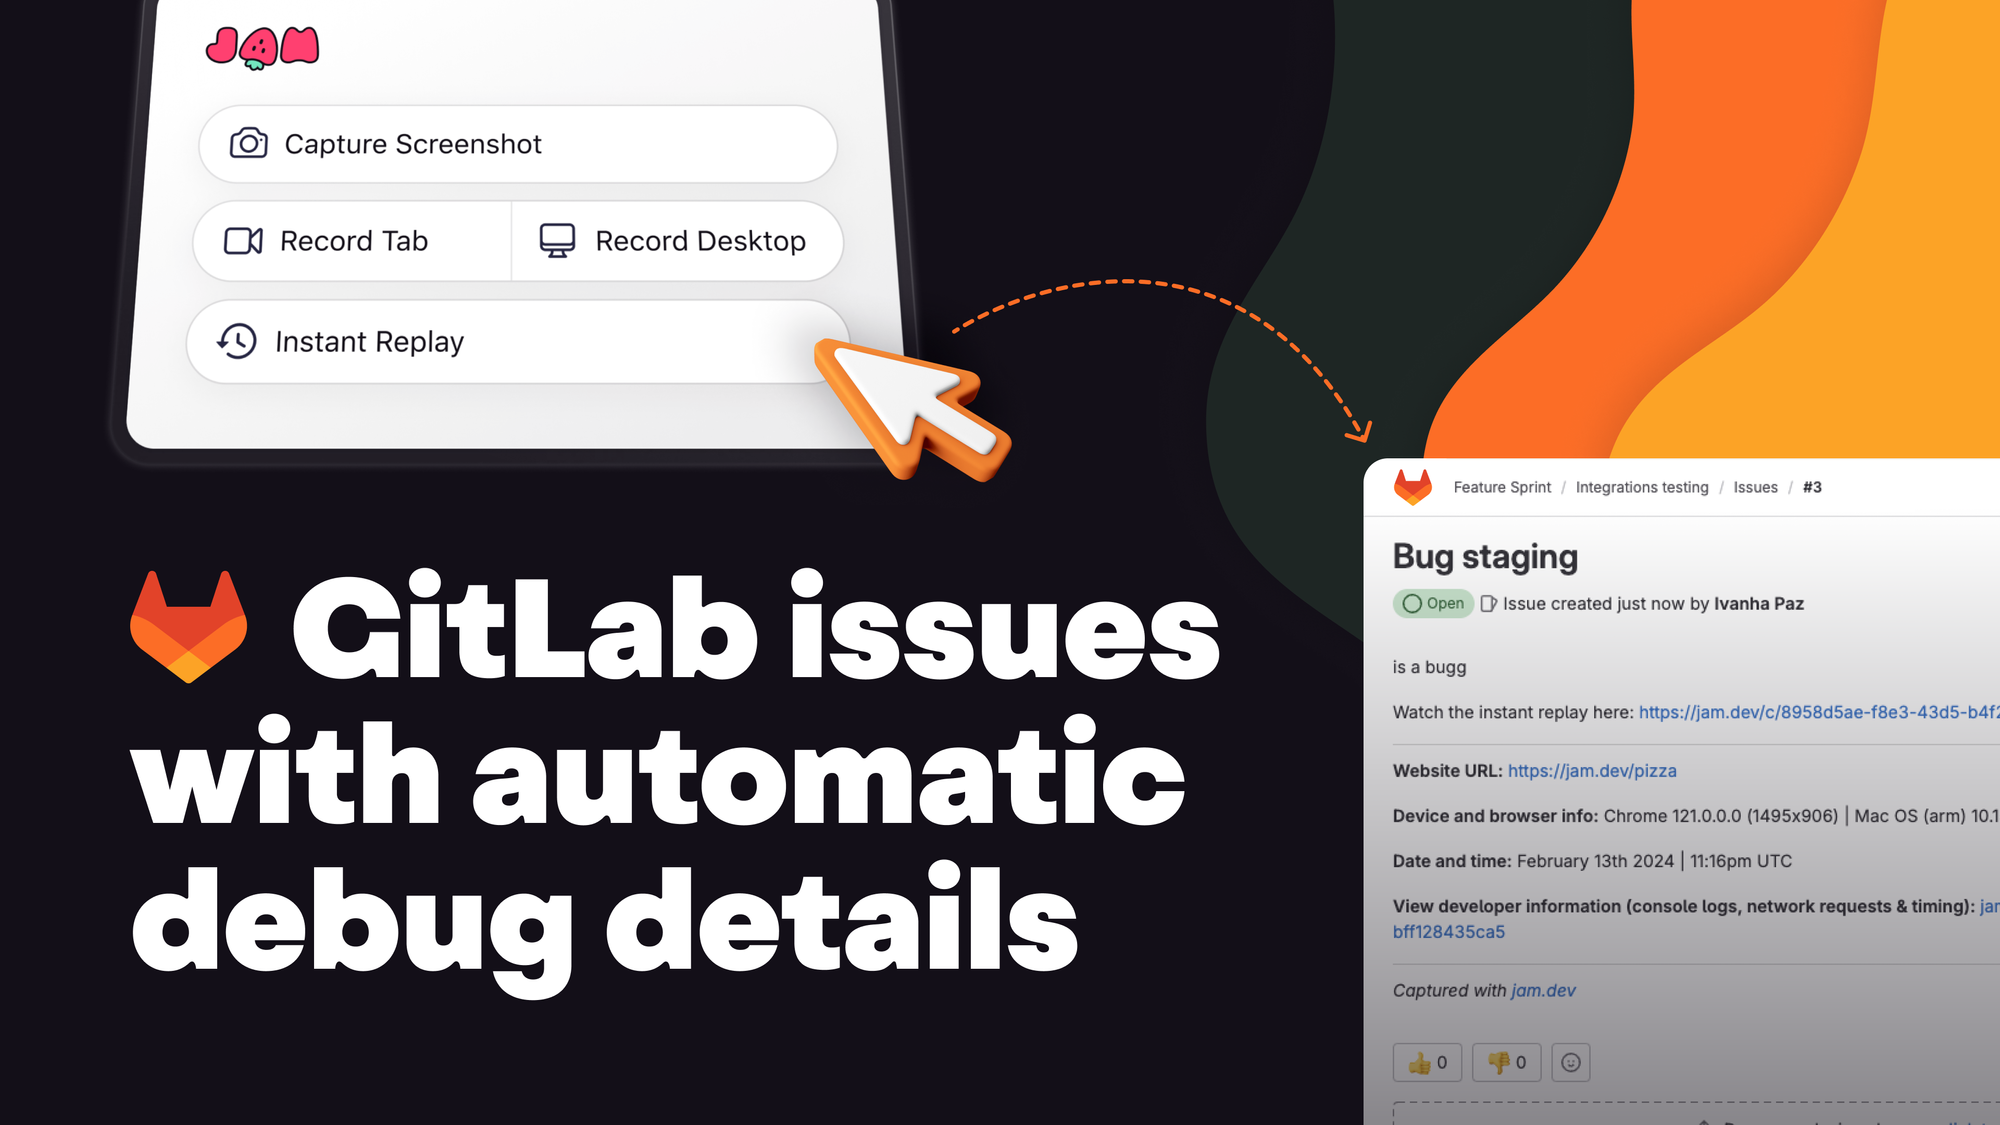 Launching today: Create GitLab issues 20x faster!